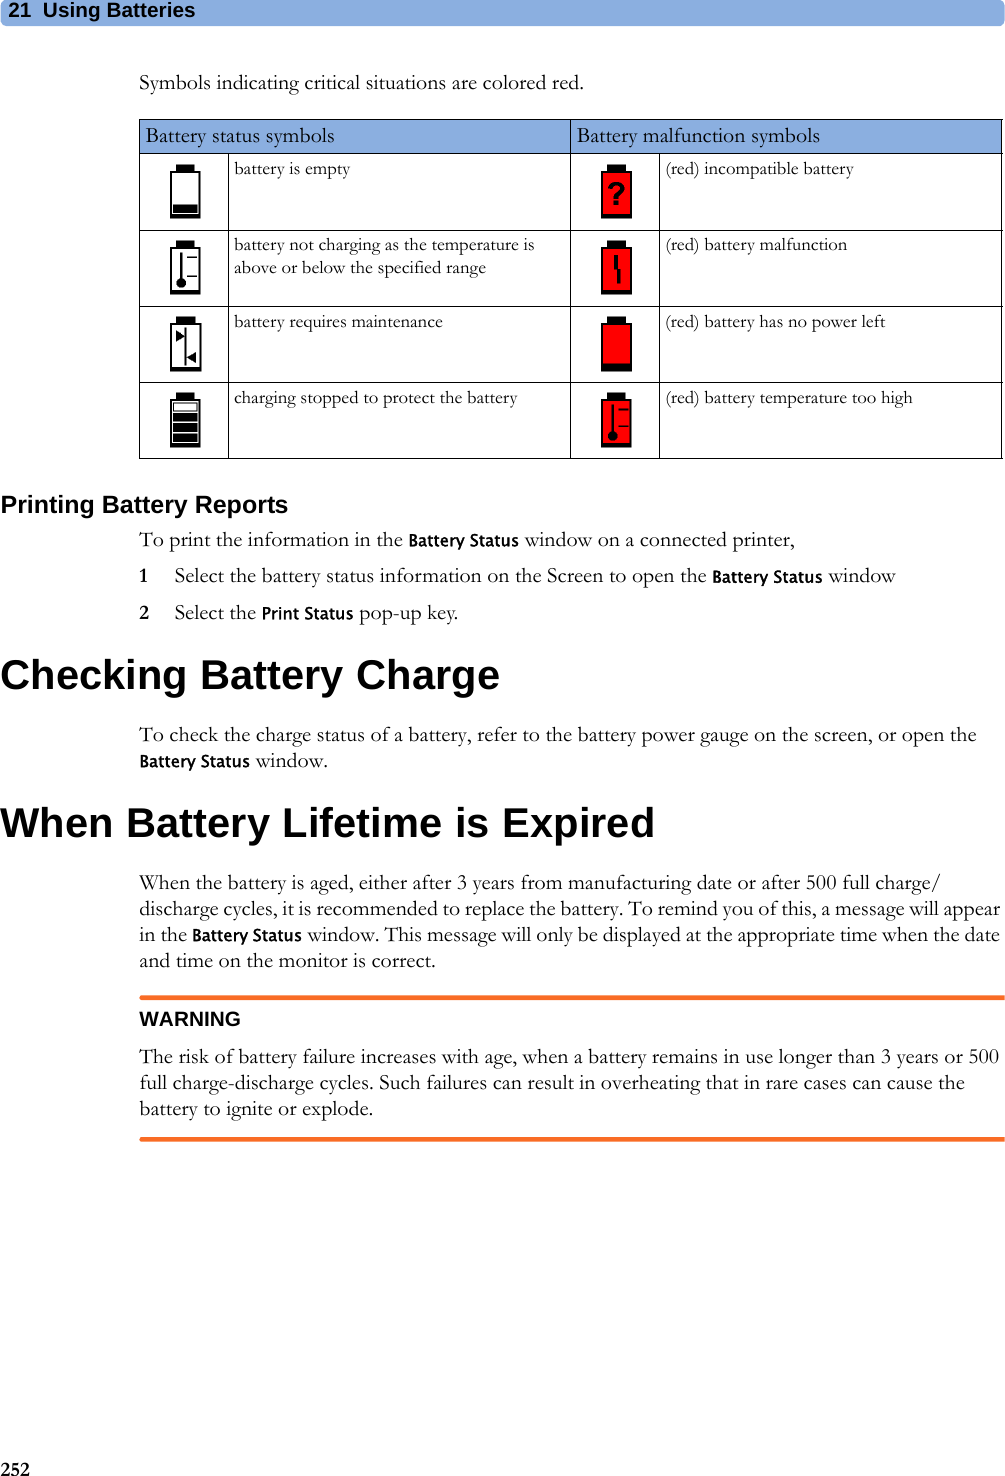 21 Using Batteries252Symbols indicating critical situations are colored red.Printing Battery ReportsTo print the information in the Battery Status window on a connected printer,1Select the battery status information on the Screen to open the Battery Status window2Select the Print Status pop-up key.Checking Battery ChargeTo check the charge status of a battery, refer to the battery power gauge on the screen, or open the Battery Status window.When Battery Lifetime is ExpiredWhen the battery is aged, either after 3 years from manufacturing date or after 500 full charge/discharge cycles, it is recommended to replace the battery. To remind you of this, a message will appear in the Battery Status window. This message will only be displayed at the appropriate time when the date and time on the monitor is correct.WARNINGThe risk of battery failure increases with age, when a battery remains in use longer than 3 years or 500 full charge-discharge cycles. Such failures can result in overheating that in rare cases can cause the battery to ignite or explode.Battery status symbols Battery malfunction symbolsbattery is empty (red) incompatible batterybattery not charging as the temperature is above or below the specified range(red) battery malfunctionbattery requires maintenance (red) battery has no power leftcharging stopped to protect the battery (red) battery temperature too high